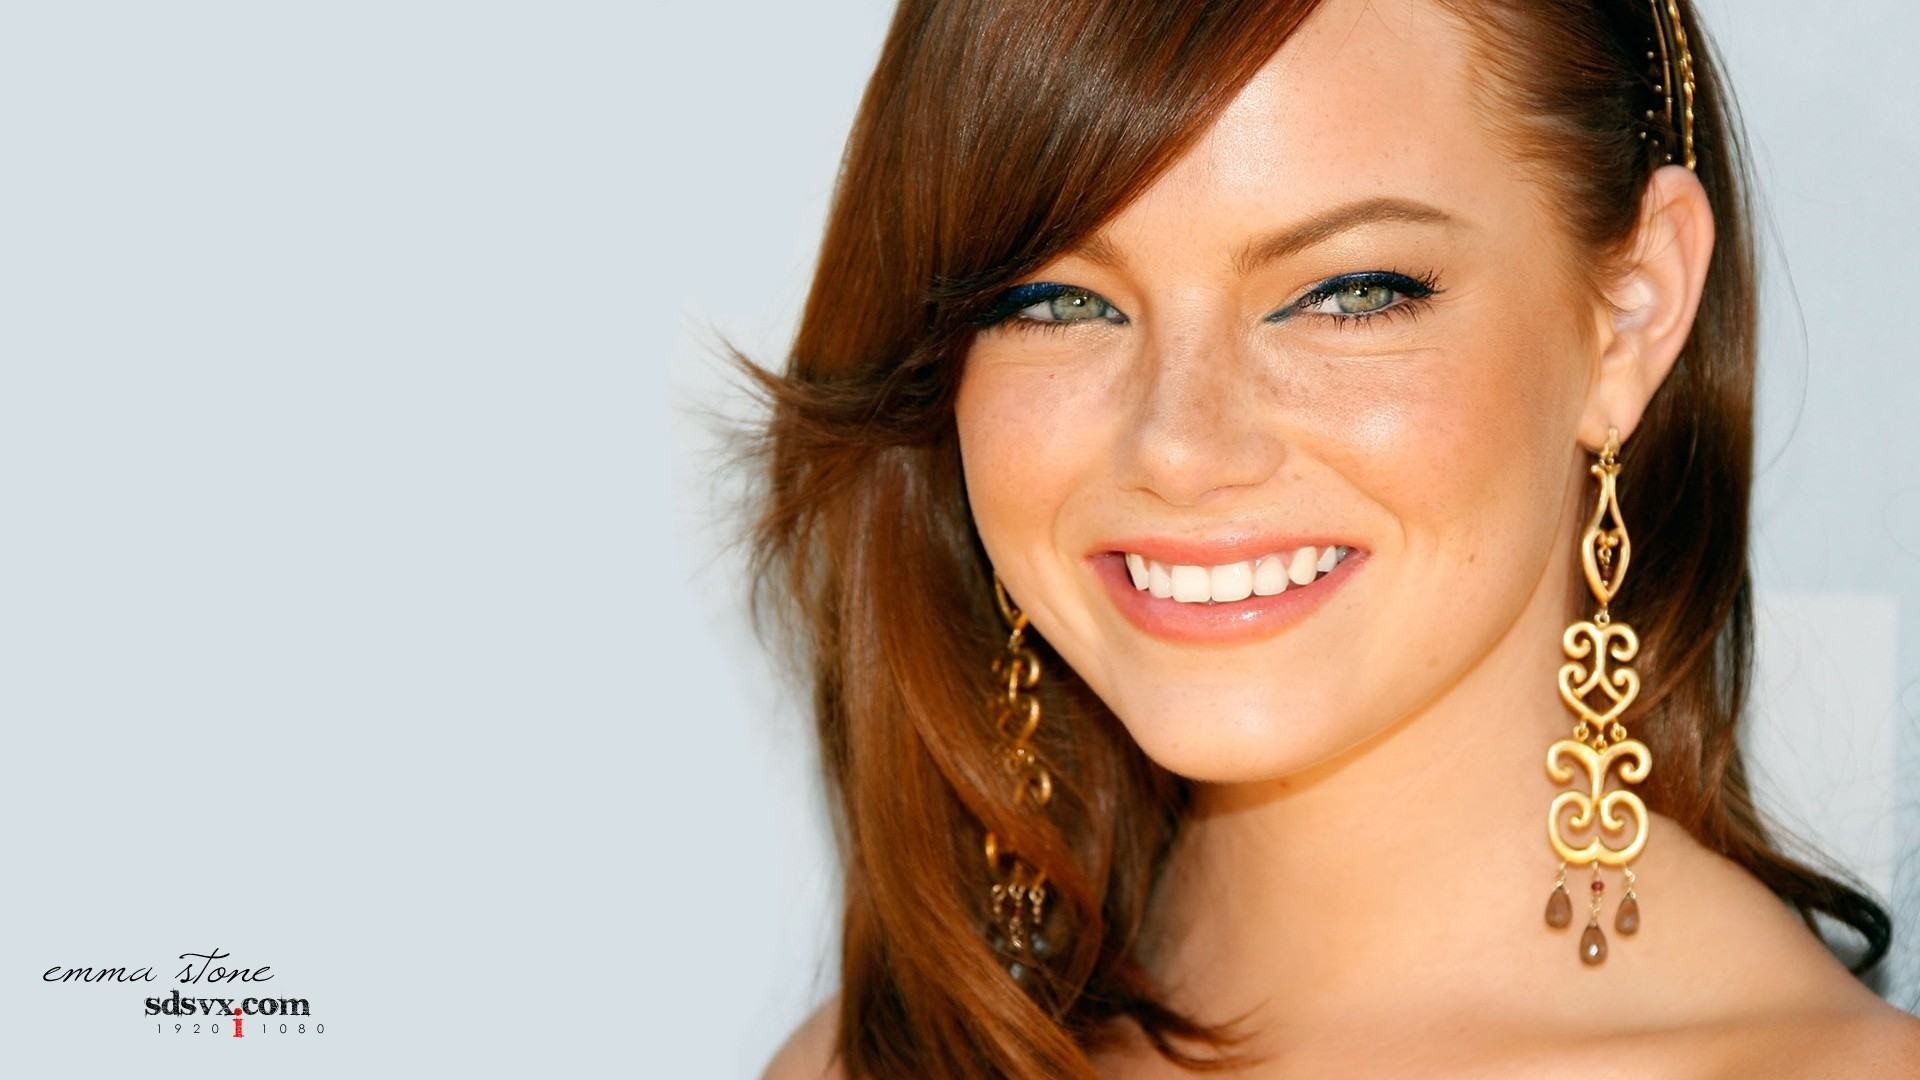 Wallpapers Backgrounds – Women Actress Celebrity Emma Stone Earrings  Headbands Laughing Faces